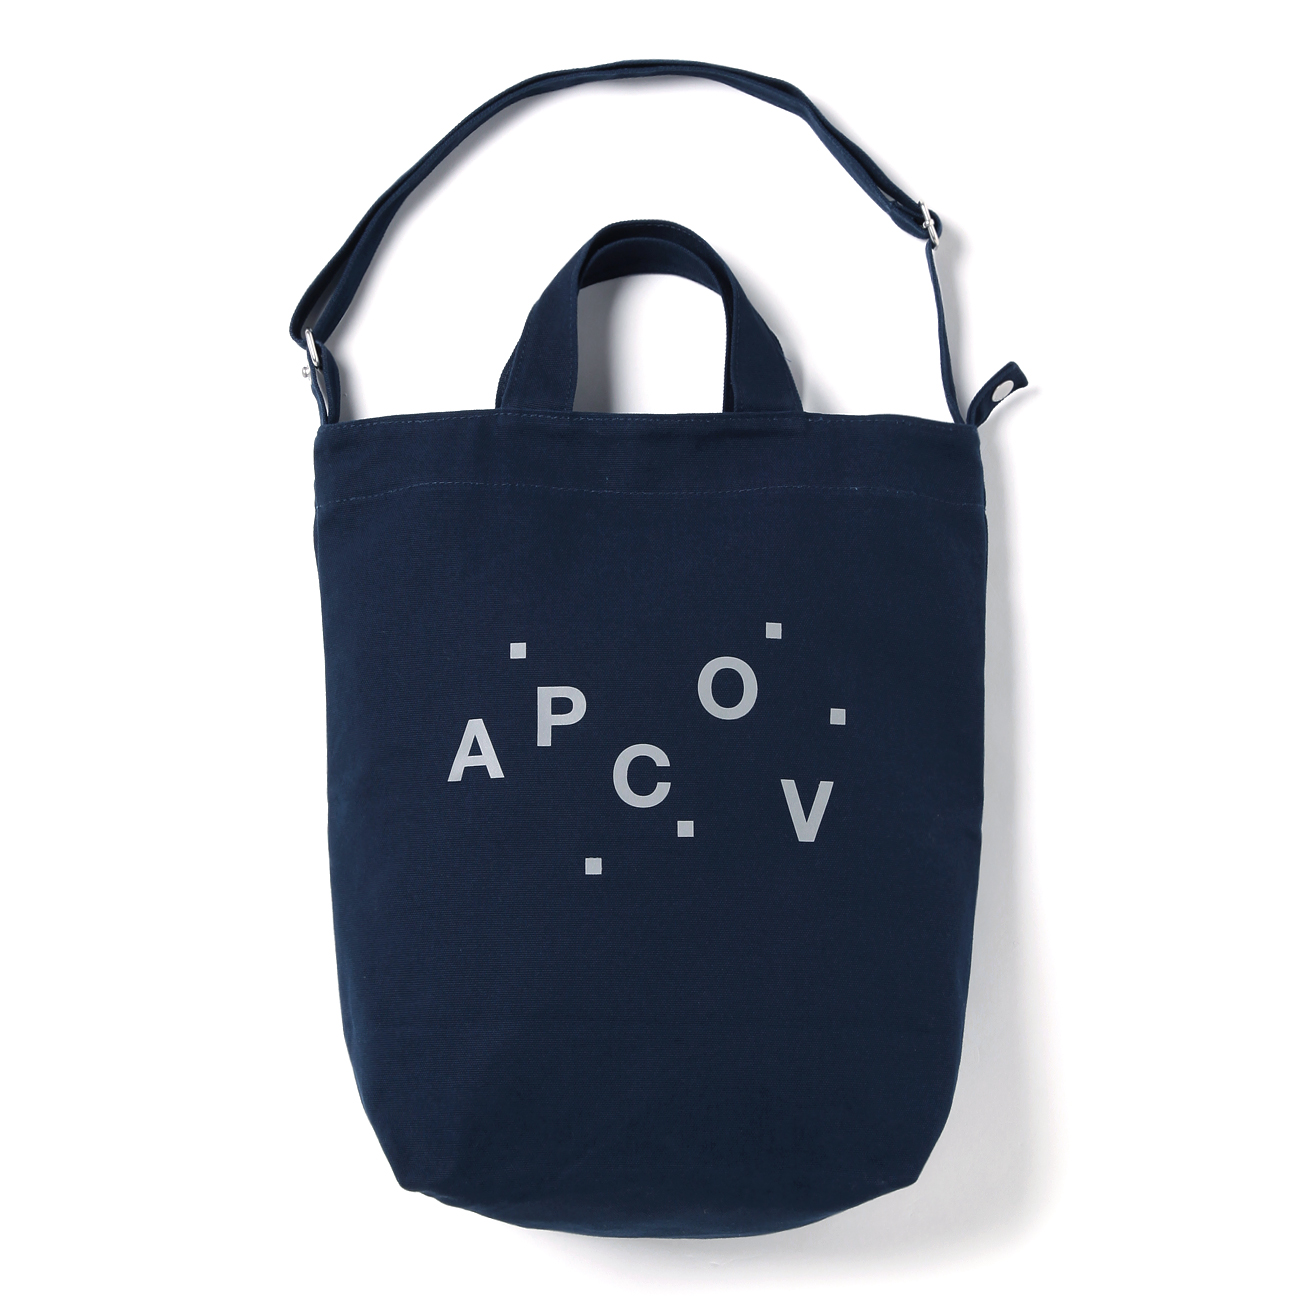 A.P.C. OUTDOOR VOICES トートバッグ - ダークネイビー